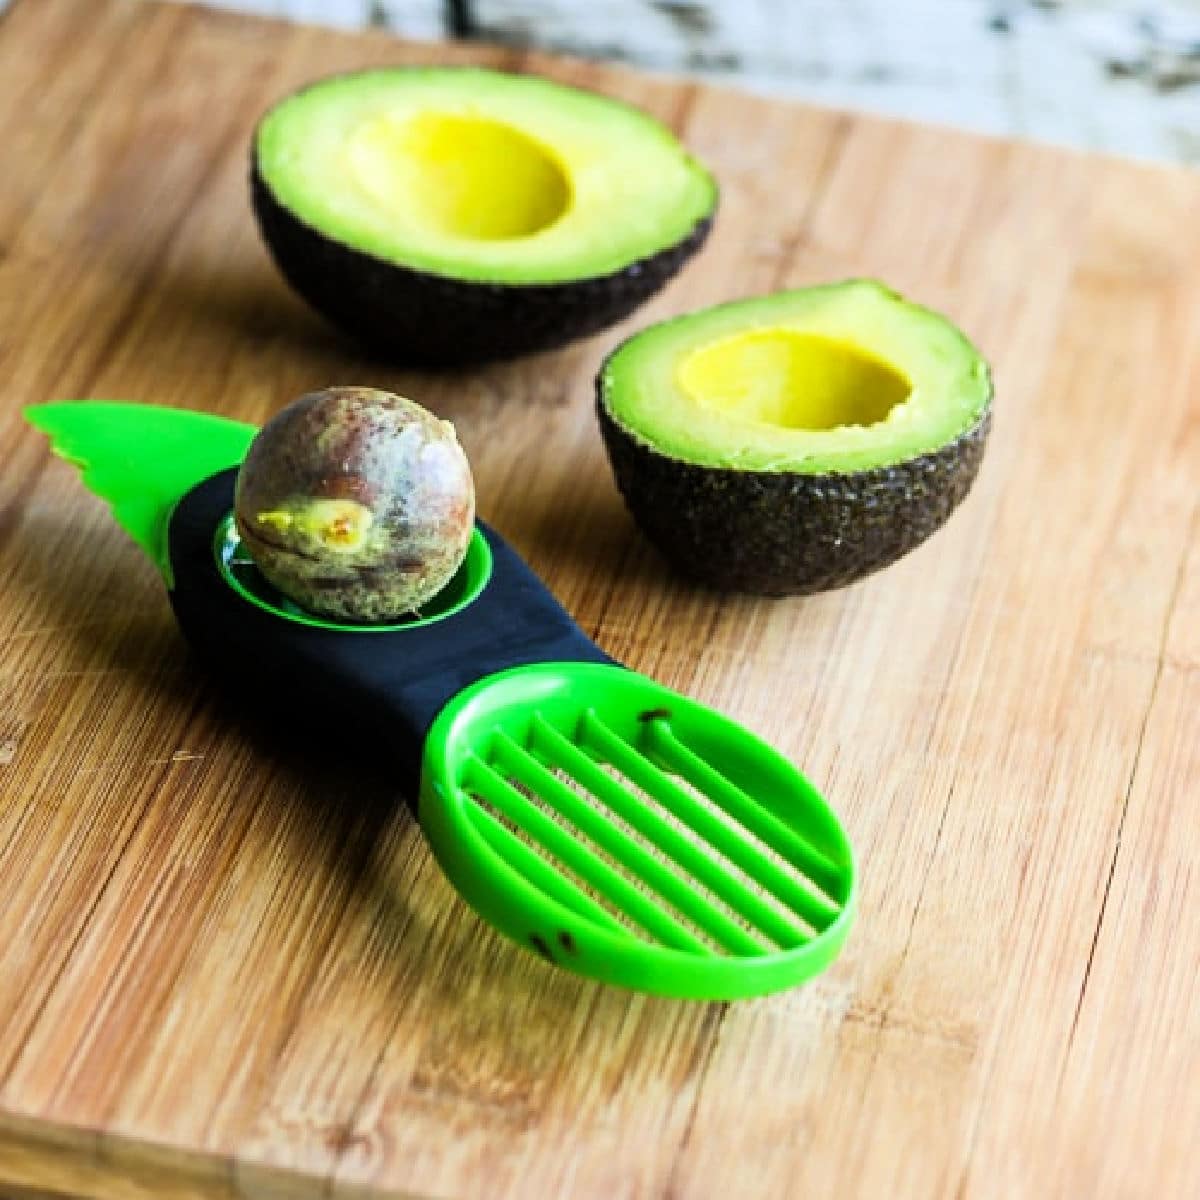 OXO Good Grips Avocado Tool shown on cutting board with avocado.